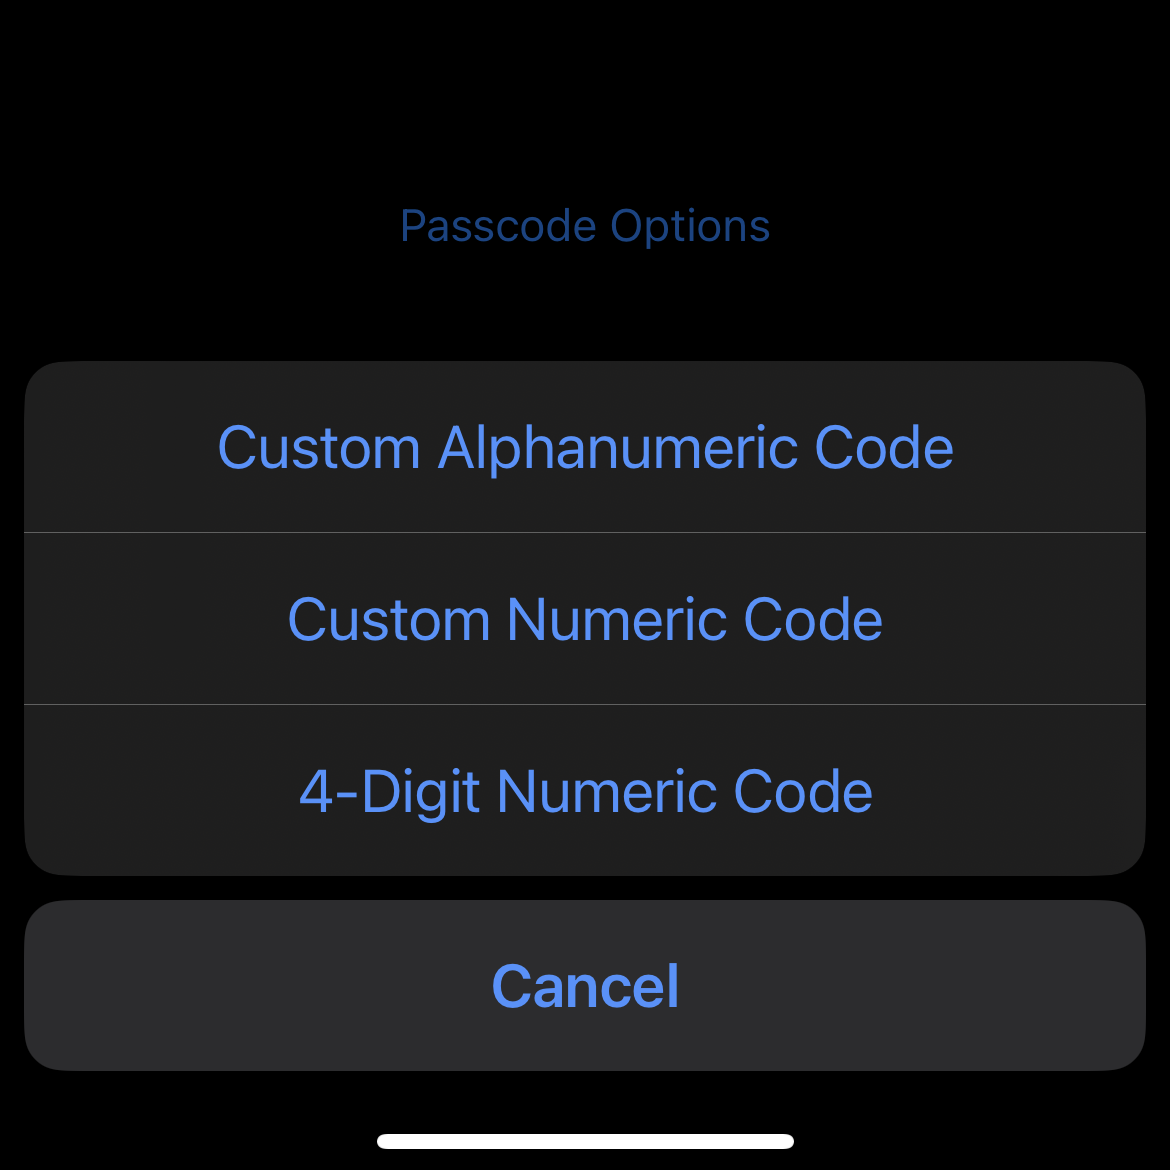 create a stronger pin with 6 digits or an alphanumeric passcode to best protect your iphone; even if a thief does steal it, the passcode is harder to guess or see